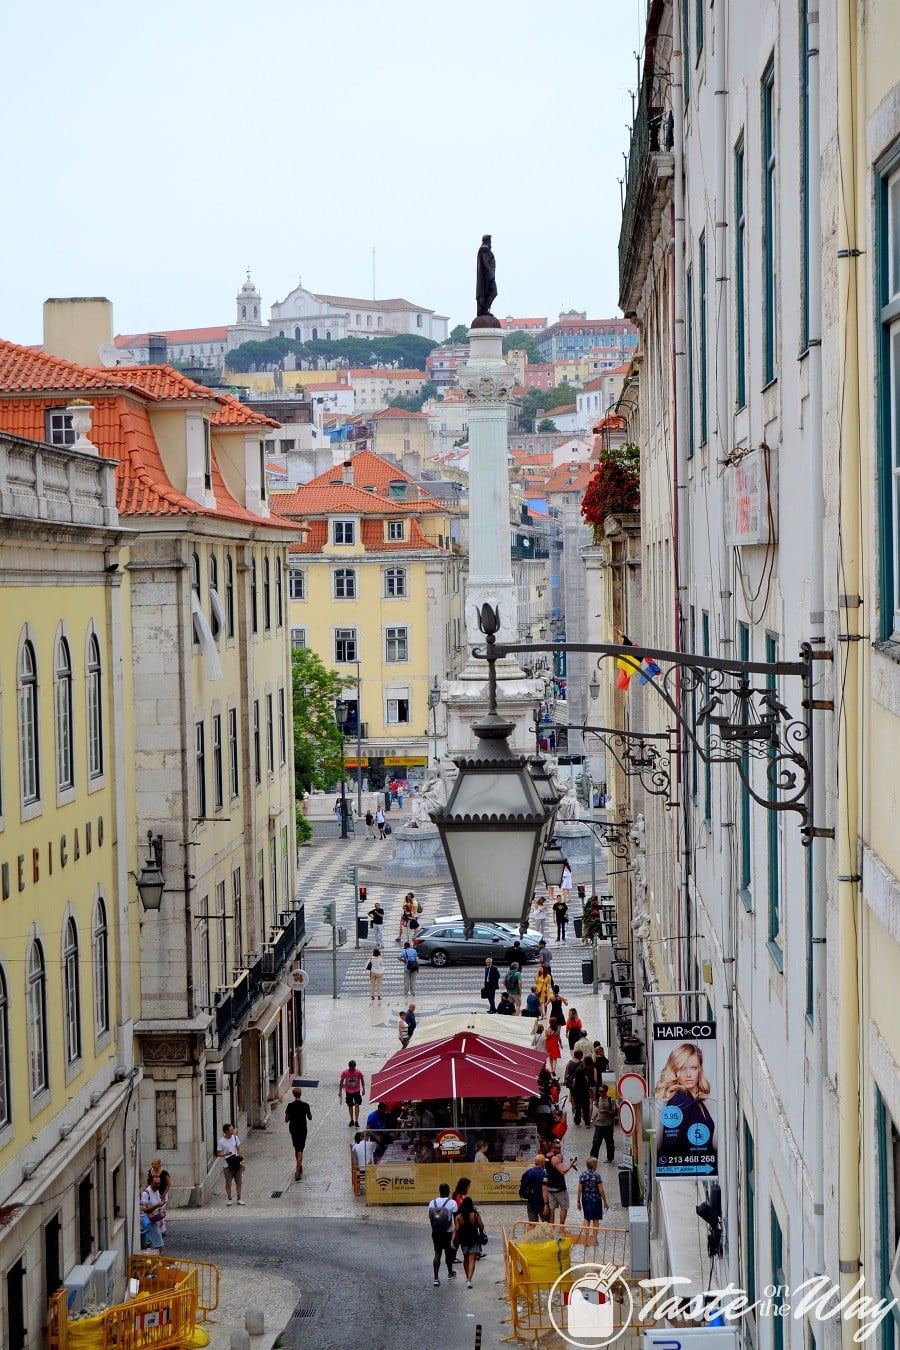 Top 15+ Best Things to Do in Lisbon, Portugal - One of the top fun #thingstodo in #Lisbon, #Portugal is to taste Port Wine in Bairro Alto. Check out for more! #travel #photography @tasteontheway